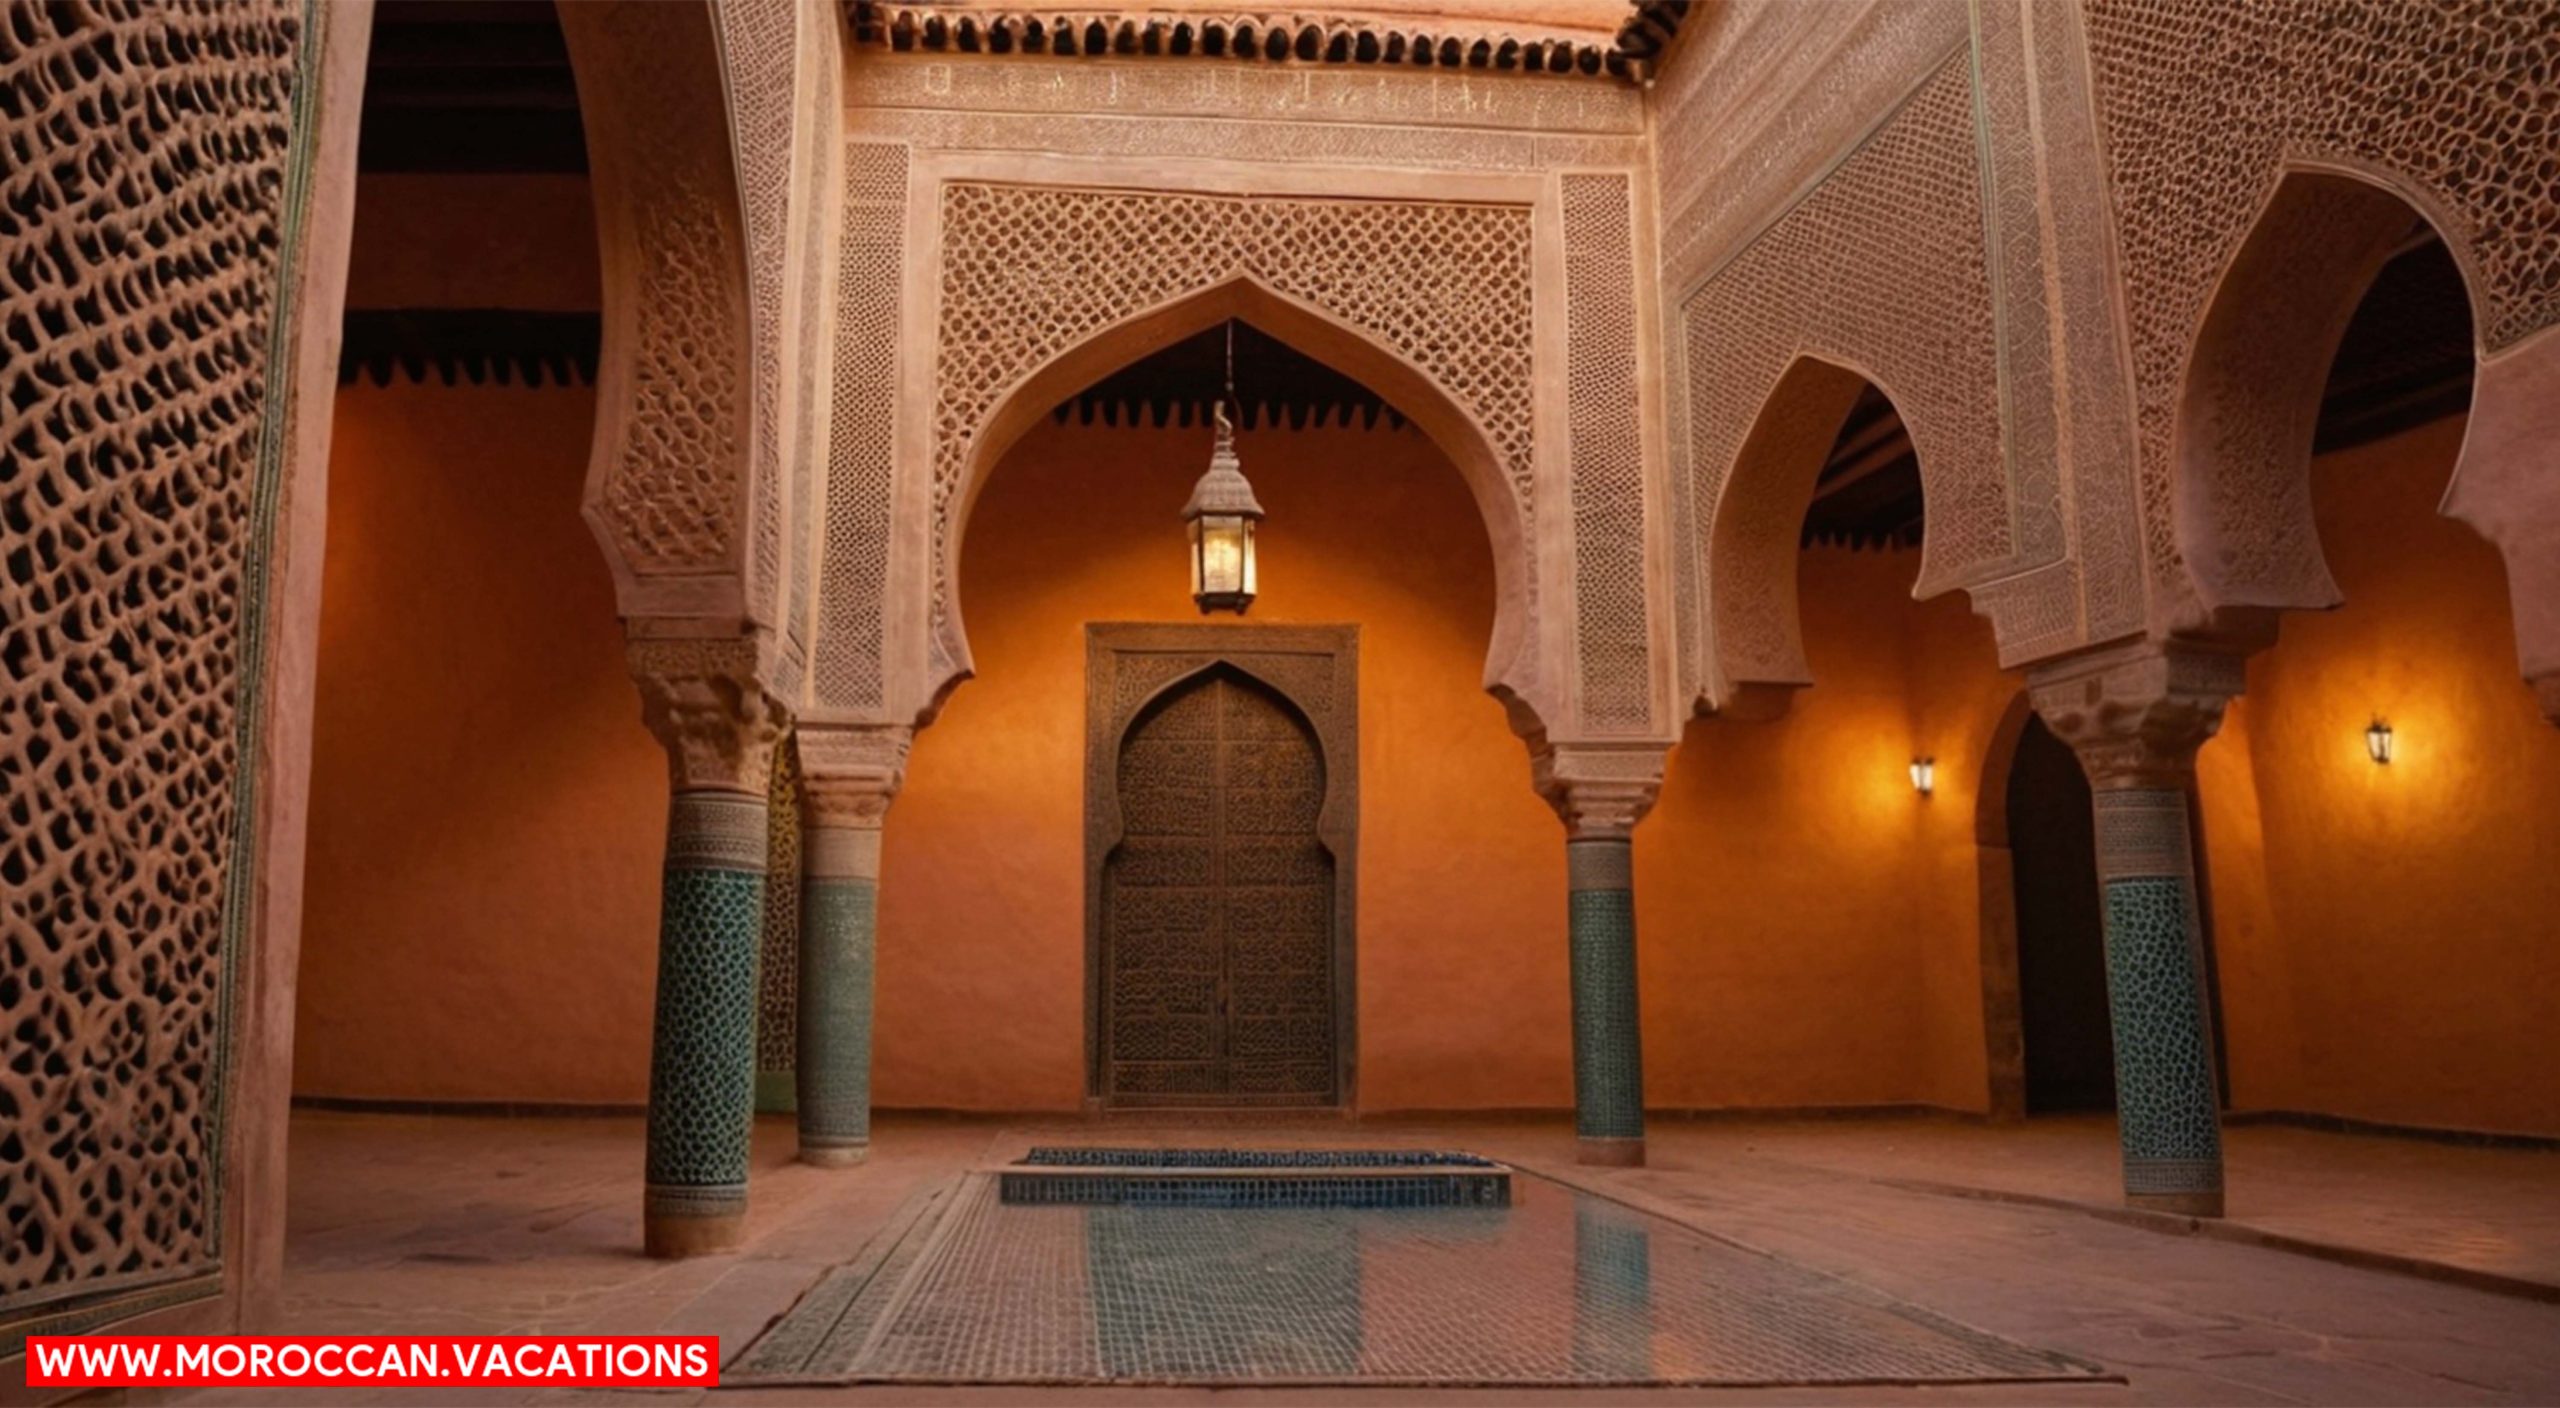 The intricate patterns adorning Marrakesh's architecture.